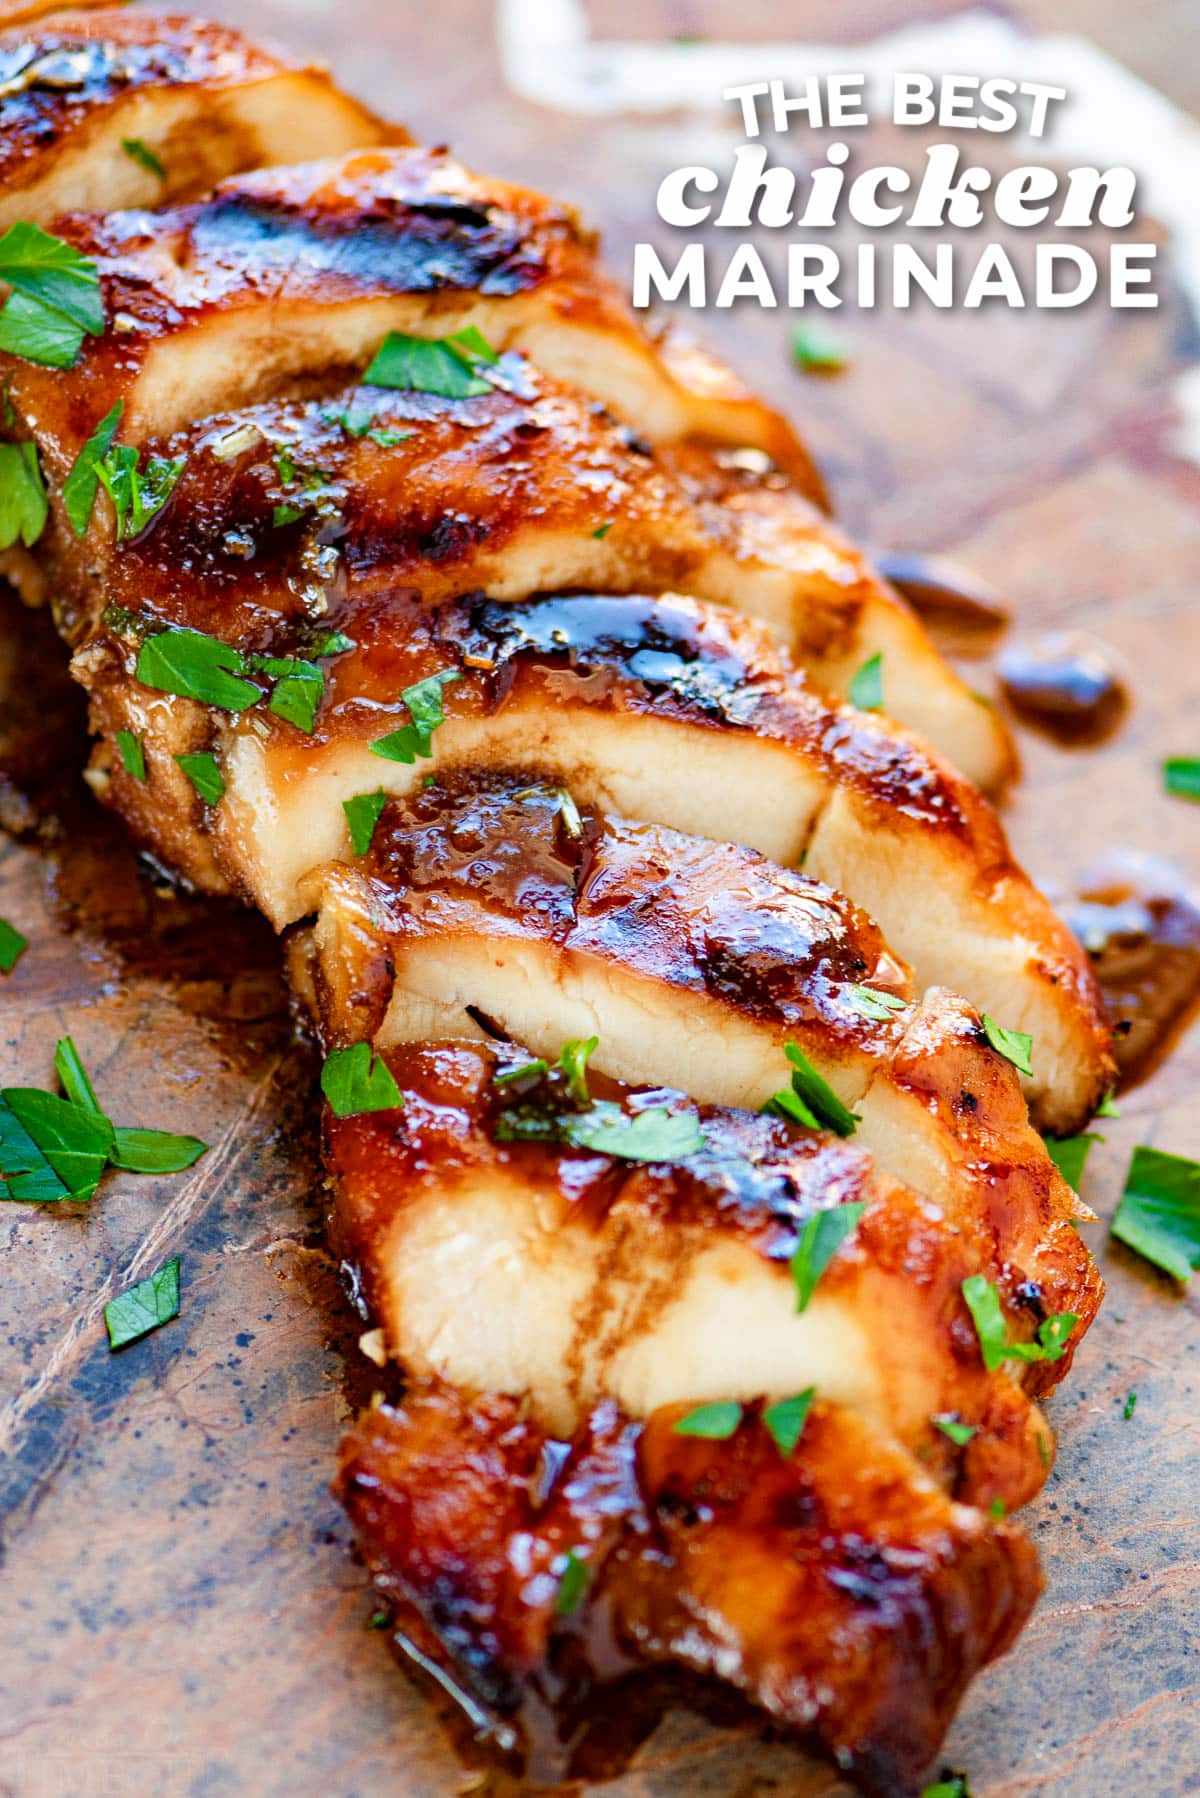 grilled chicken breast made with chicken marinade sliced on stone cutting board with title overlay at top of image.